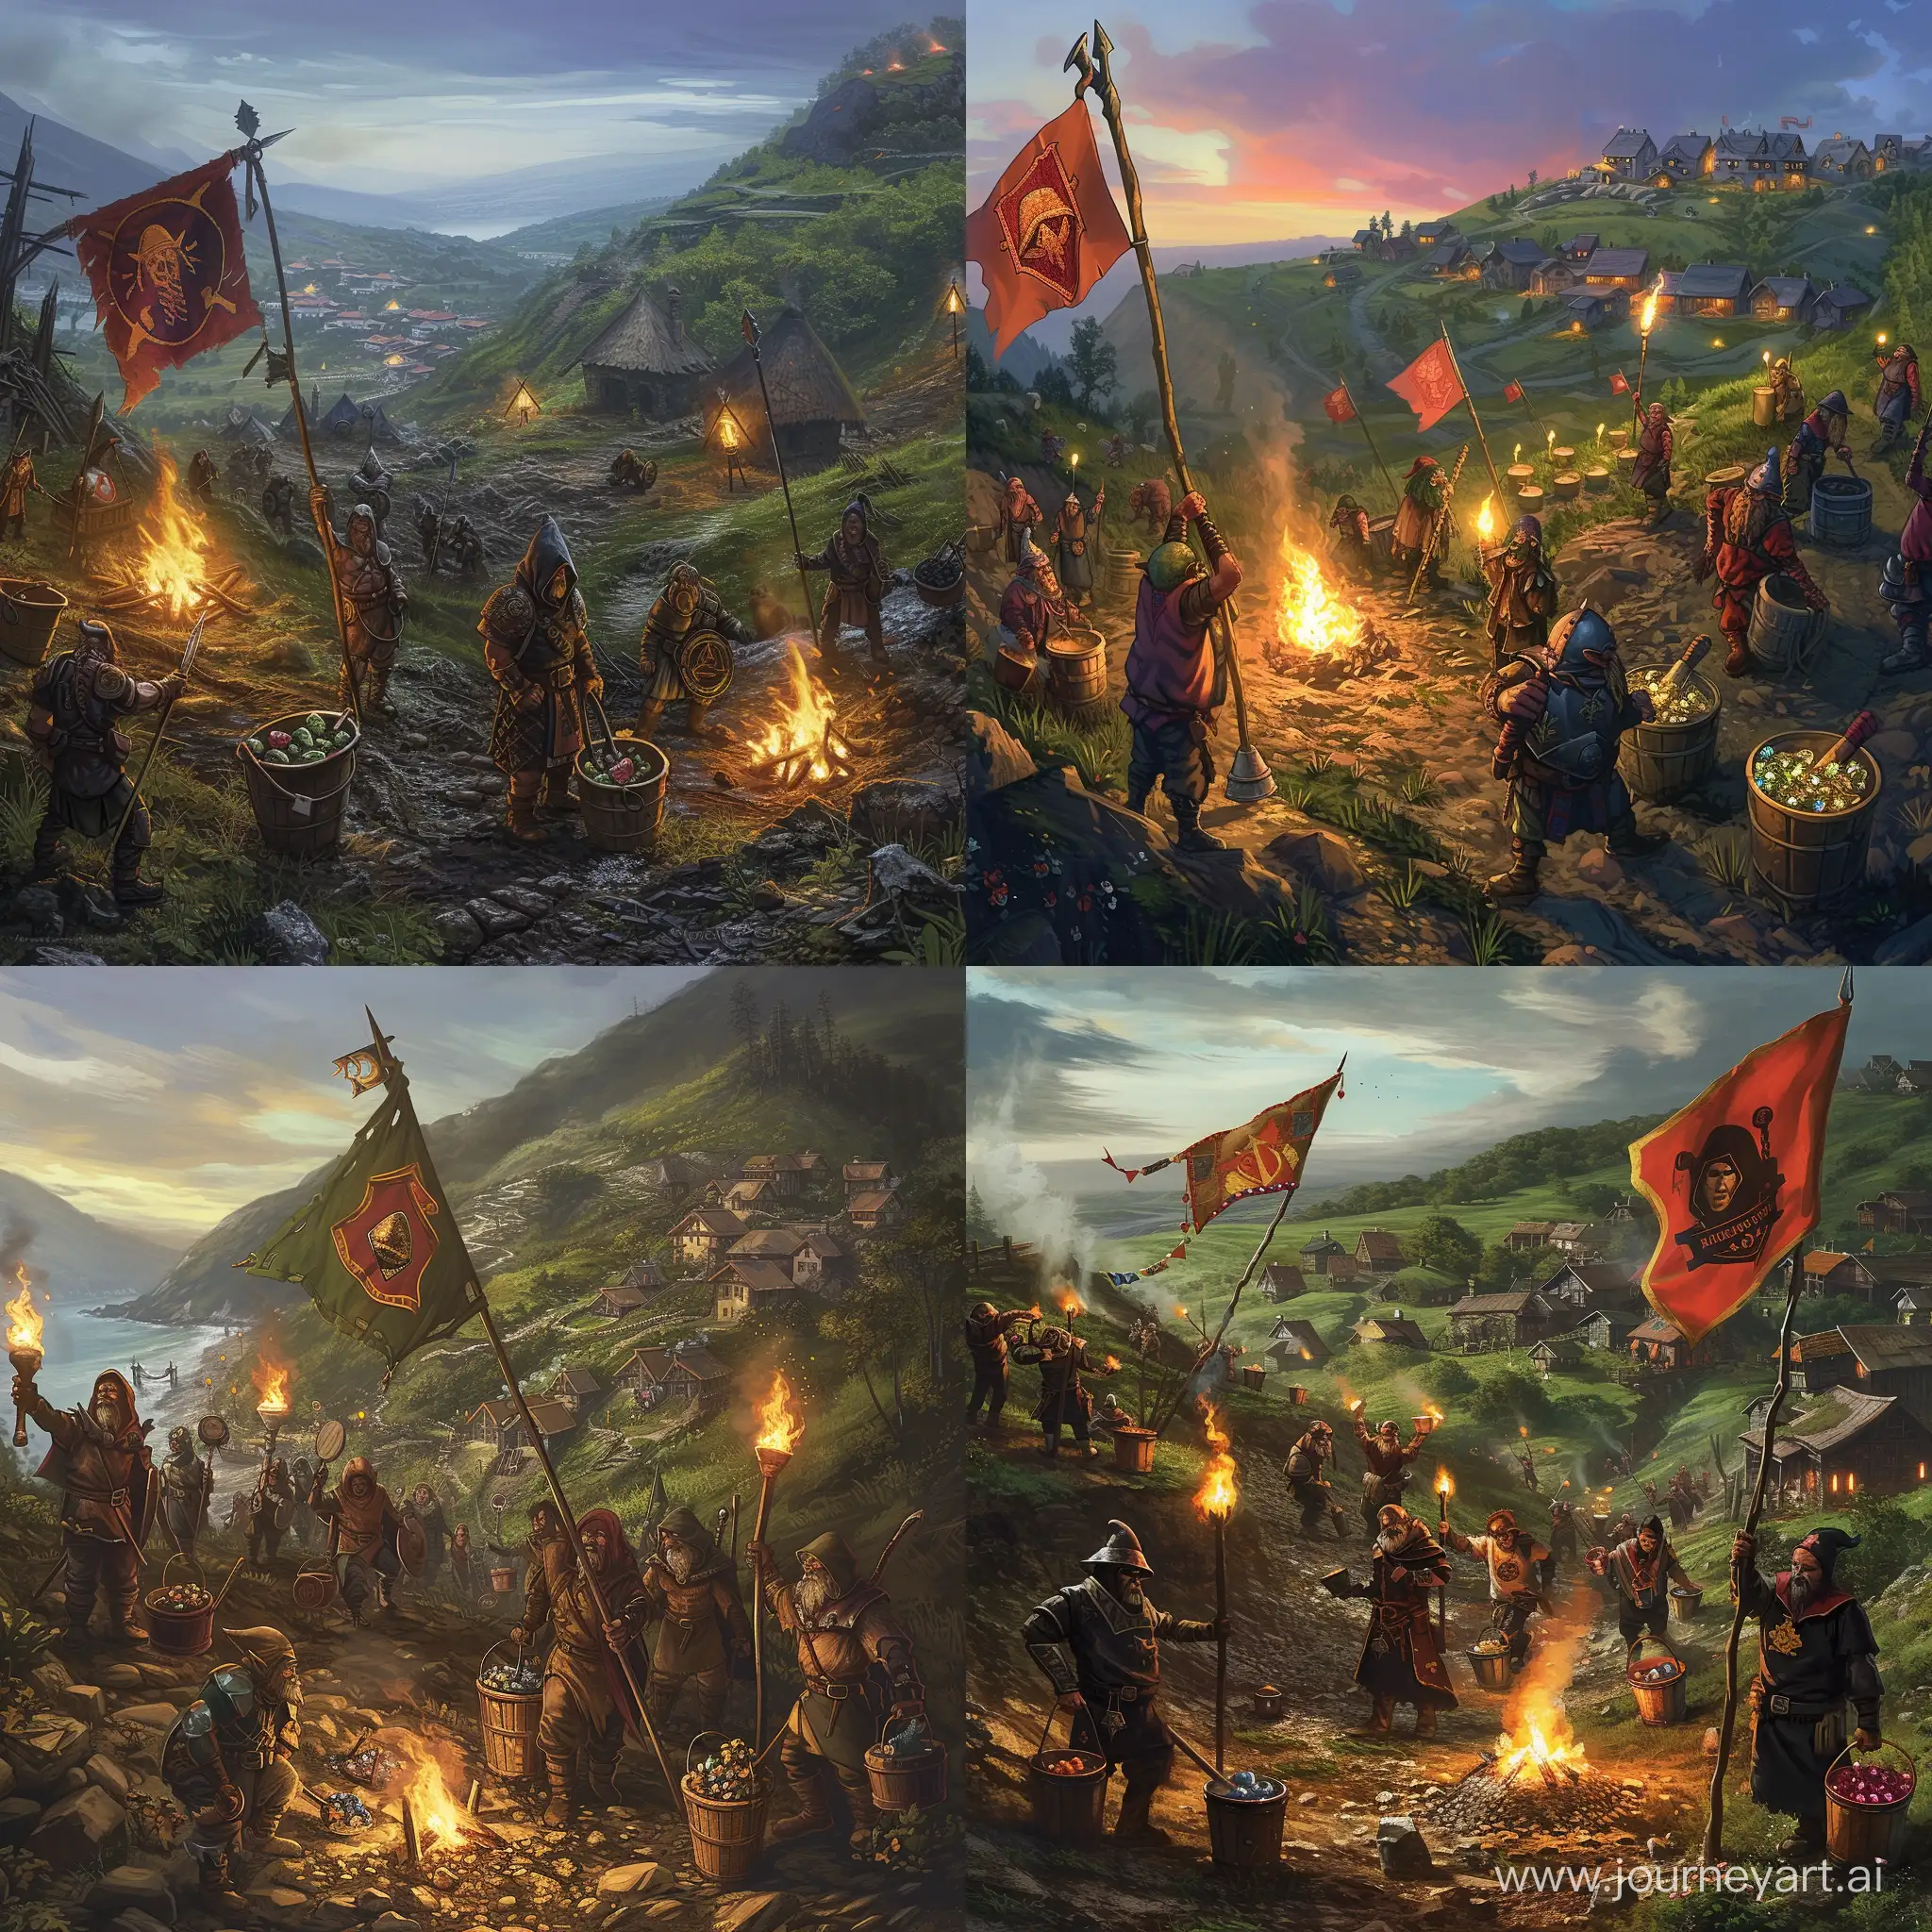 a fantasy world, hilly terrain near an affluent town, a collection of miners made up of dwarves humans and elves, buckets full of precious gems, some militant miners holding flags with an image of a hood emblazoned on them, torches and campfires